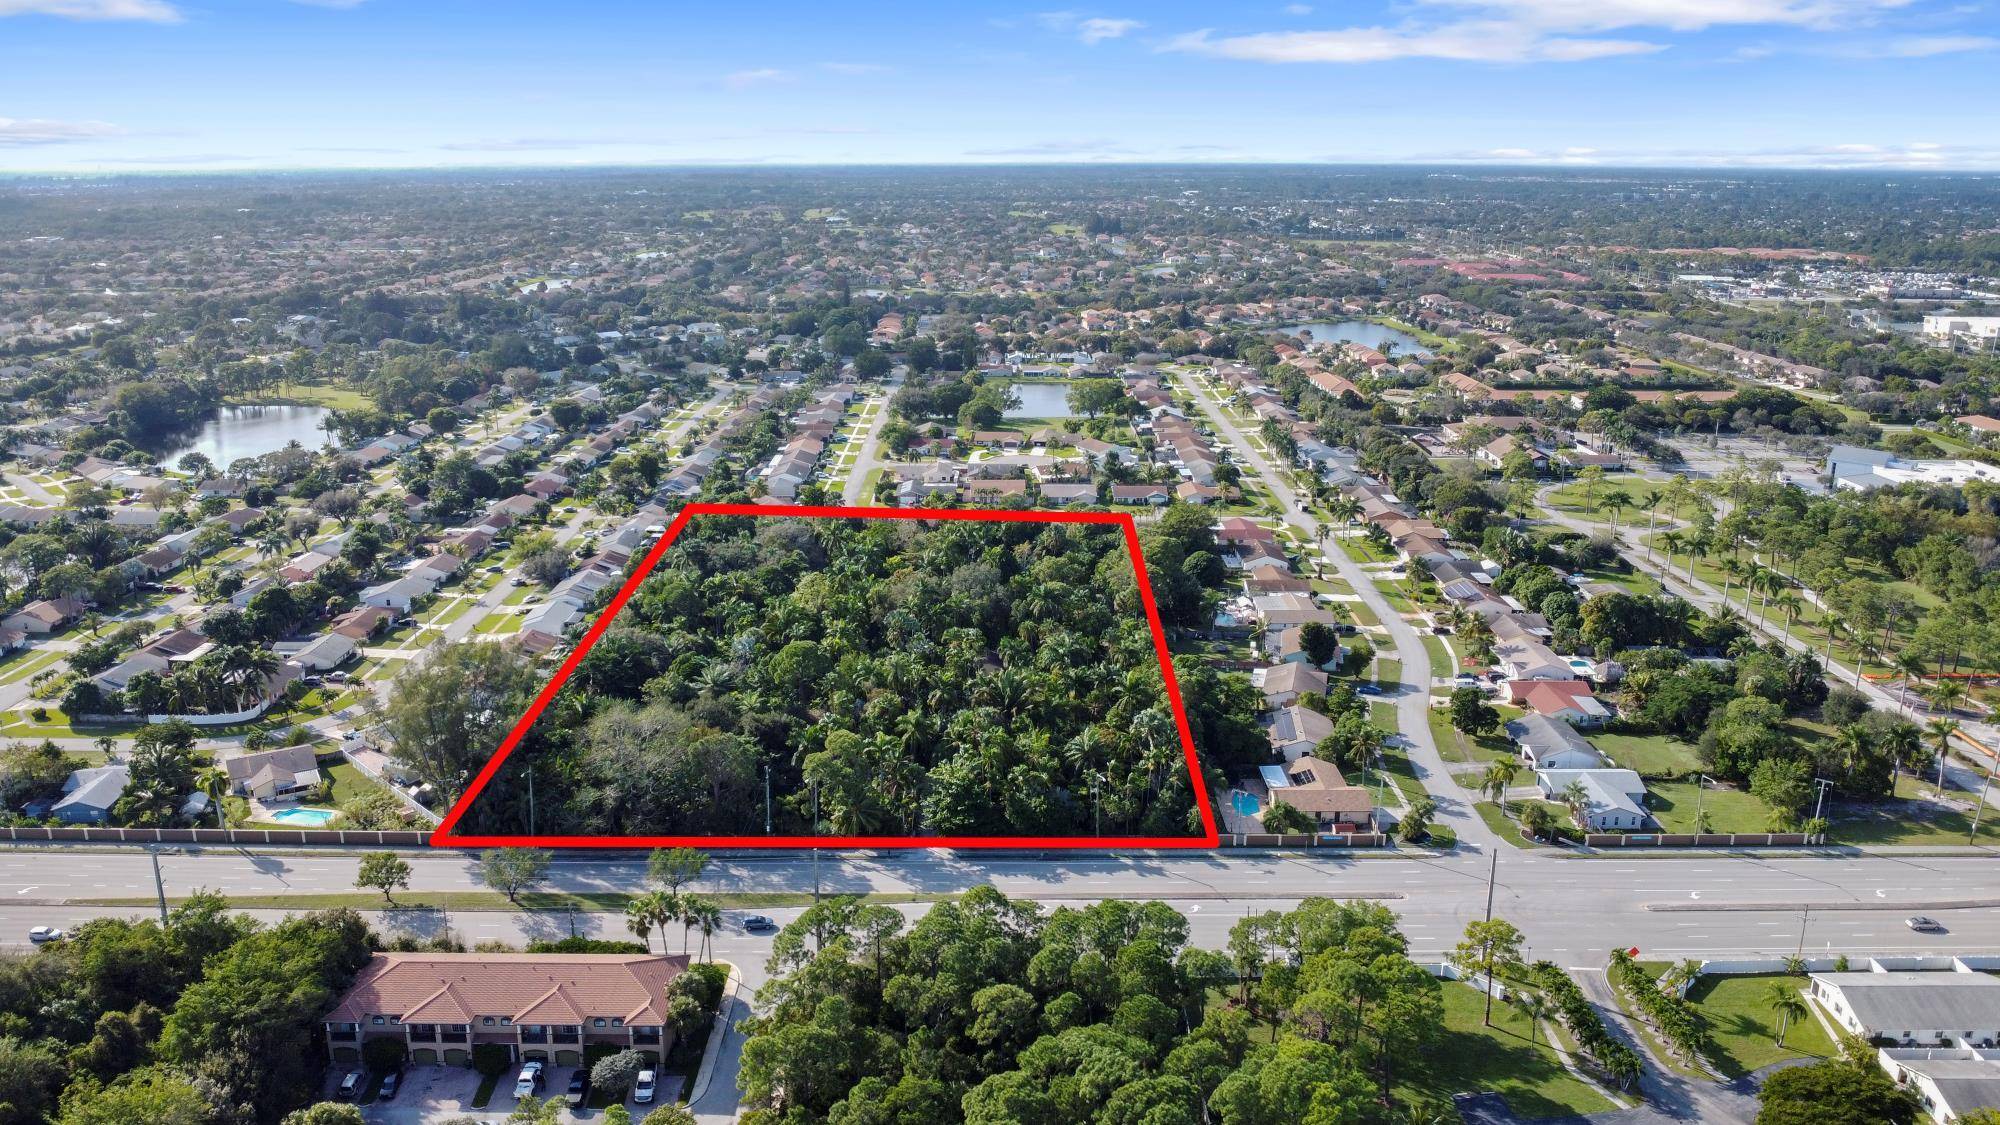 Two lots totaling 5. 55 acres with over 400 feet of direct frontage on Military Trail.